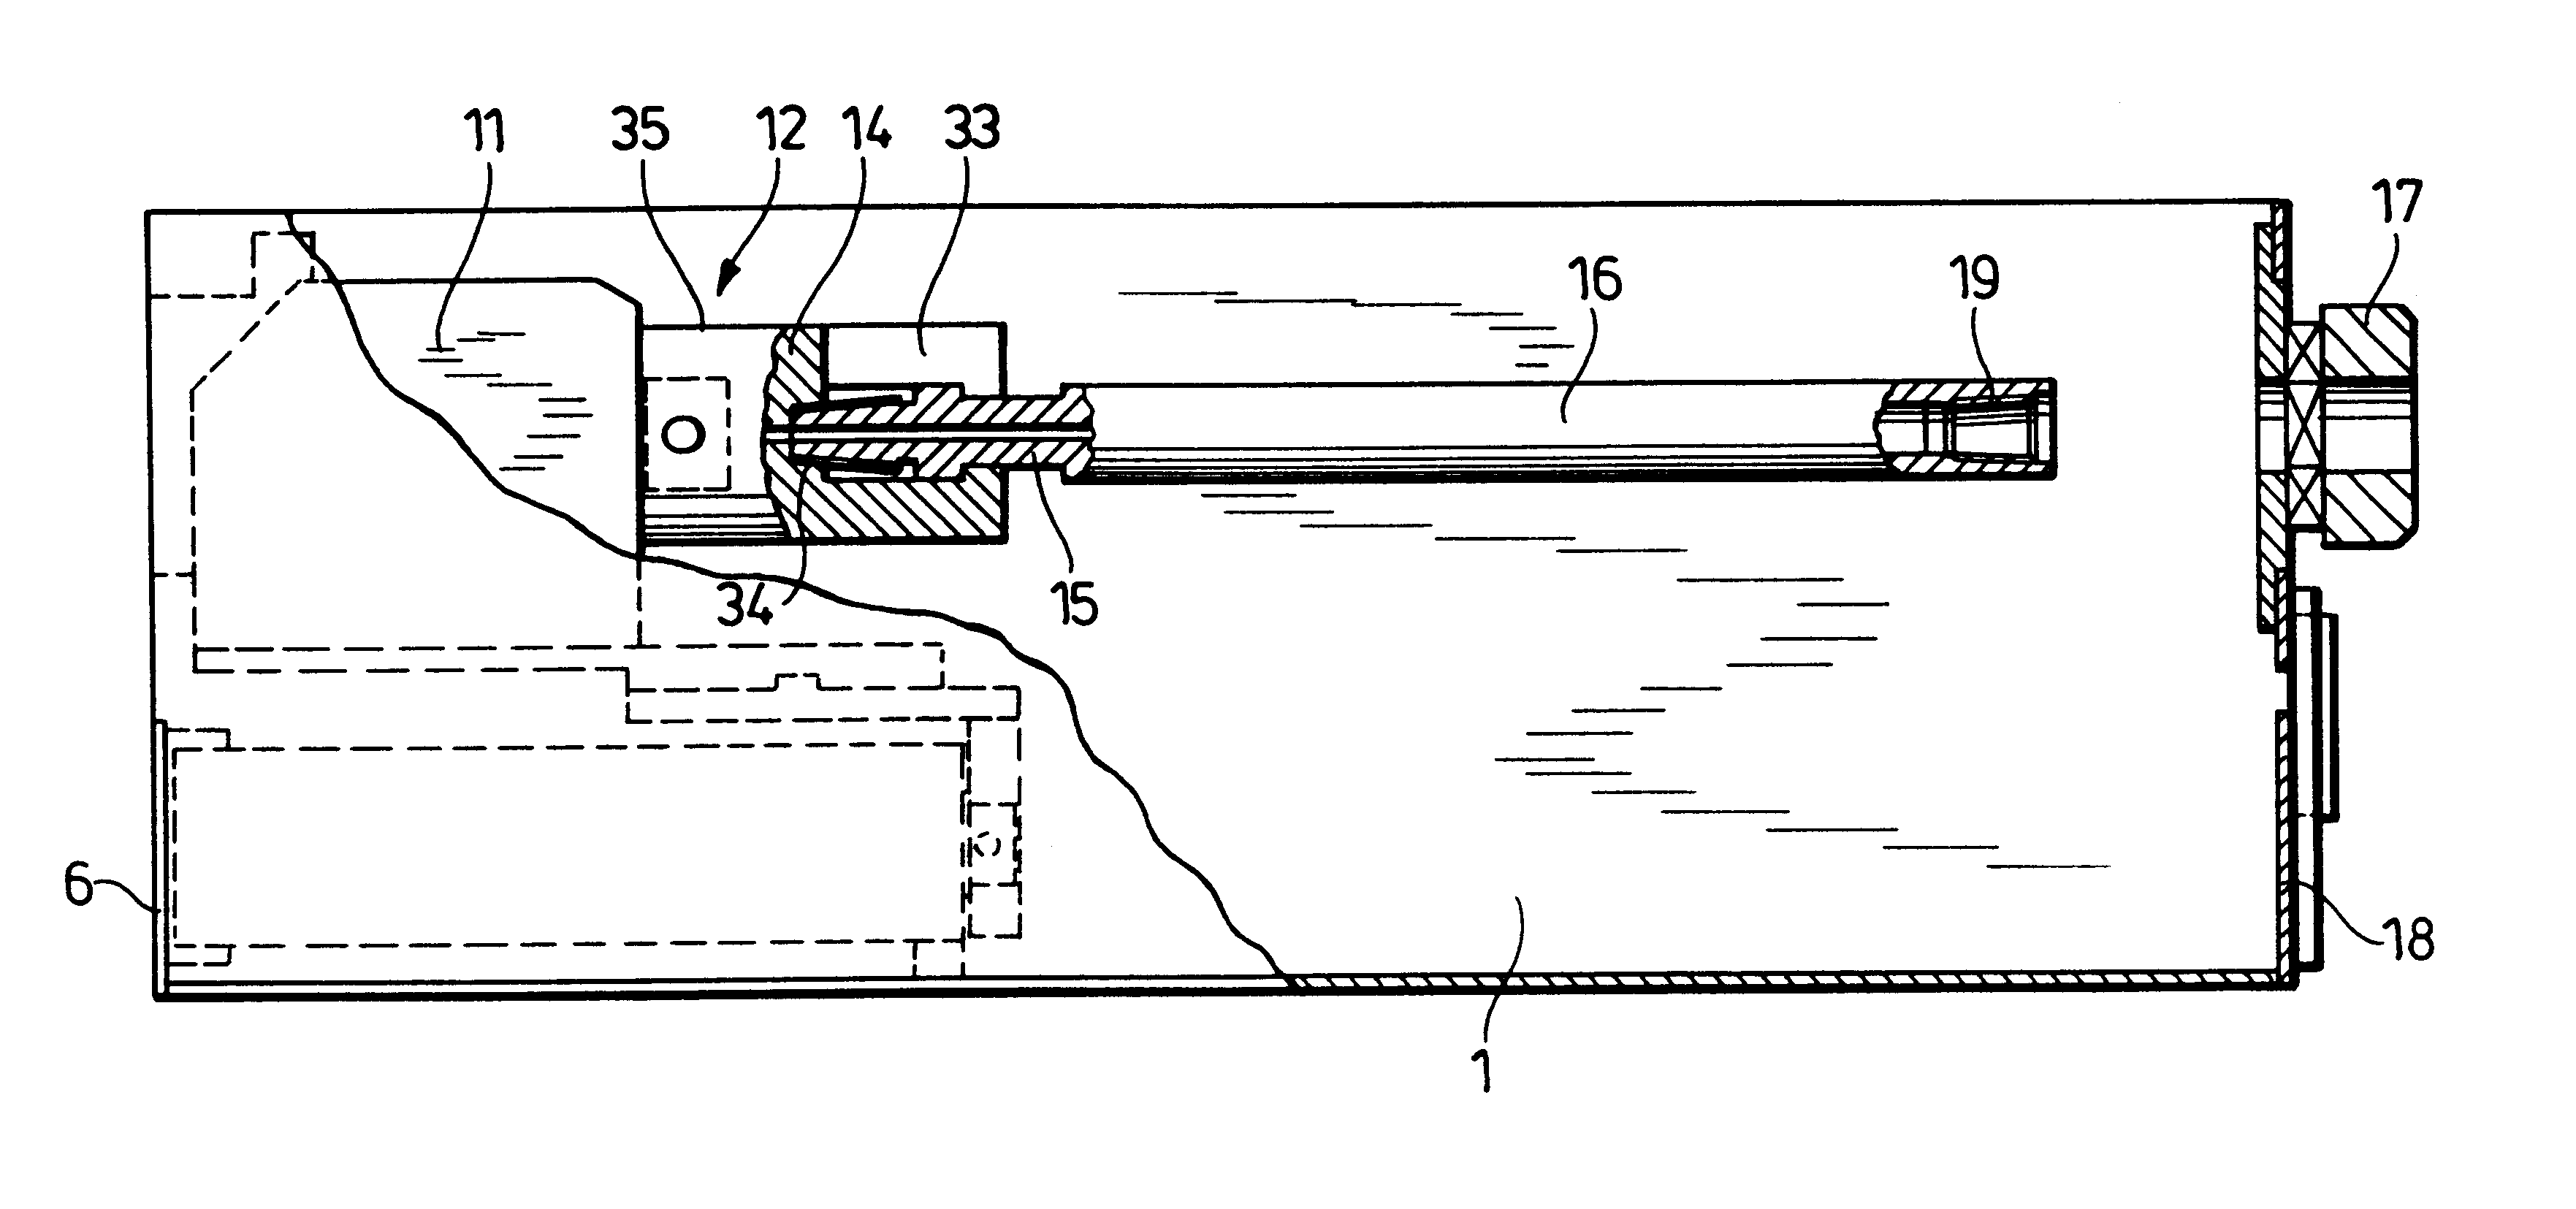 Boring apparatus with coupling for rapid connection of drill string segments